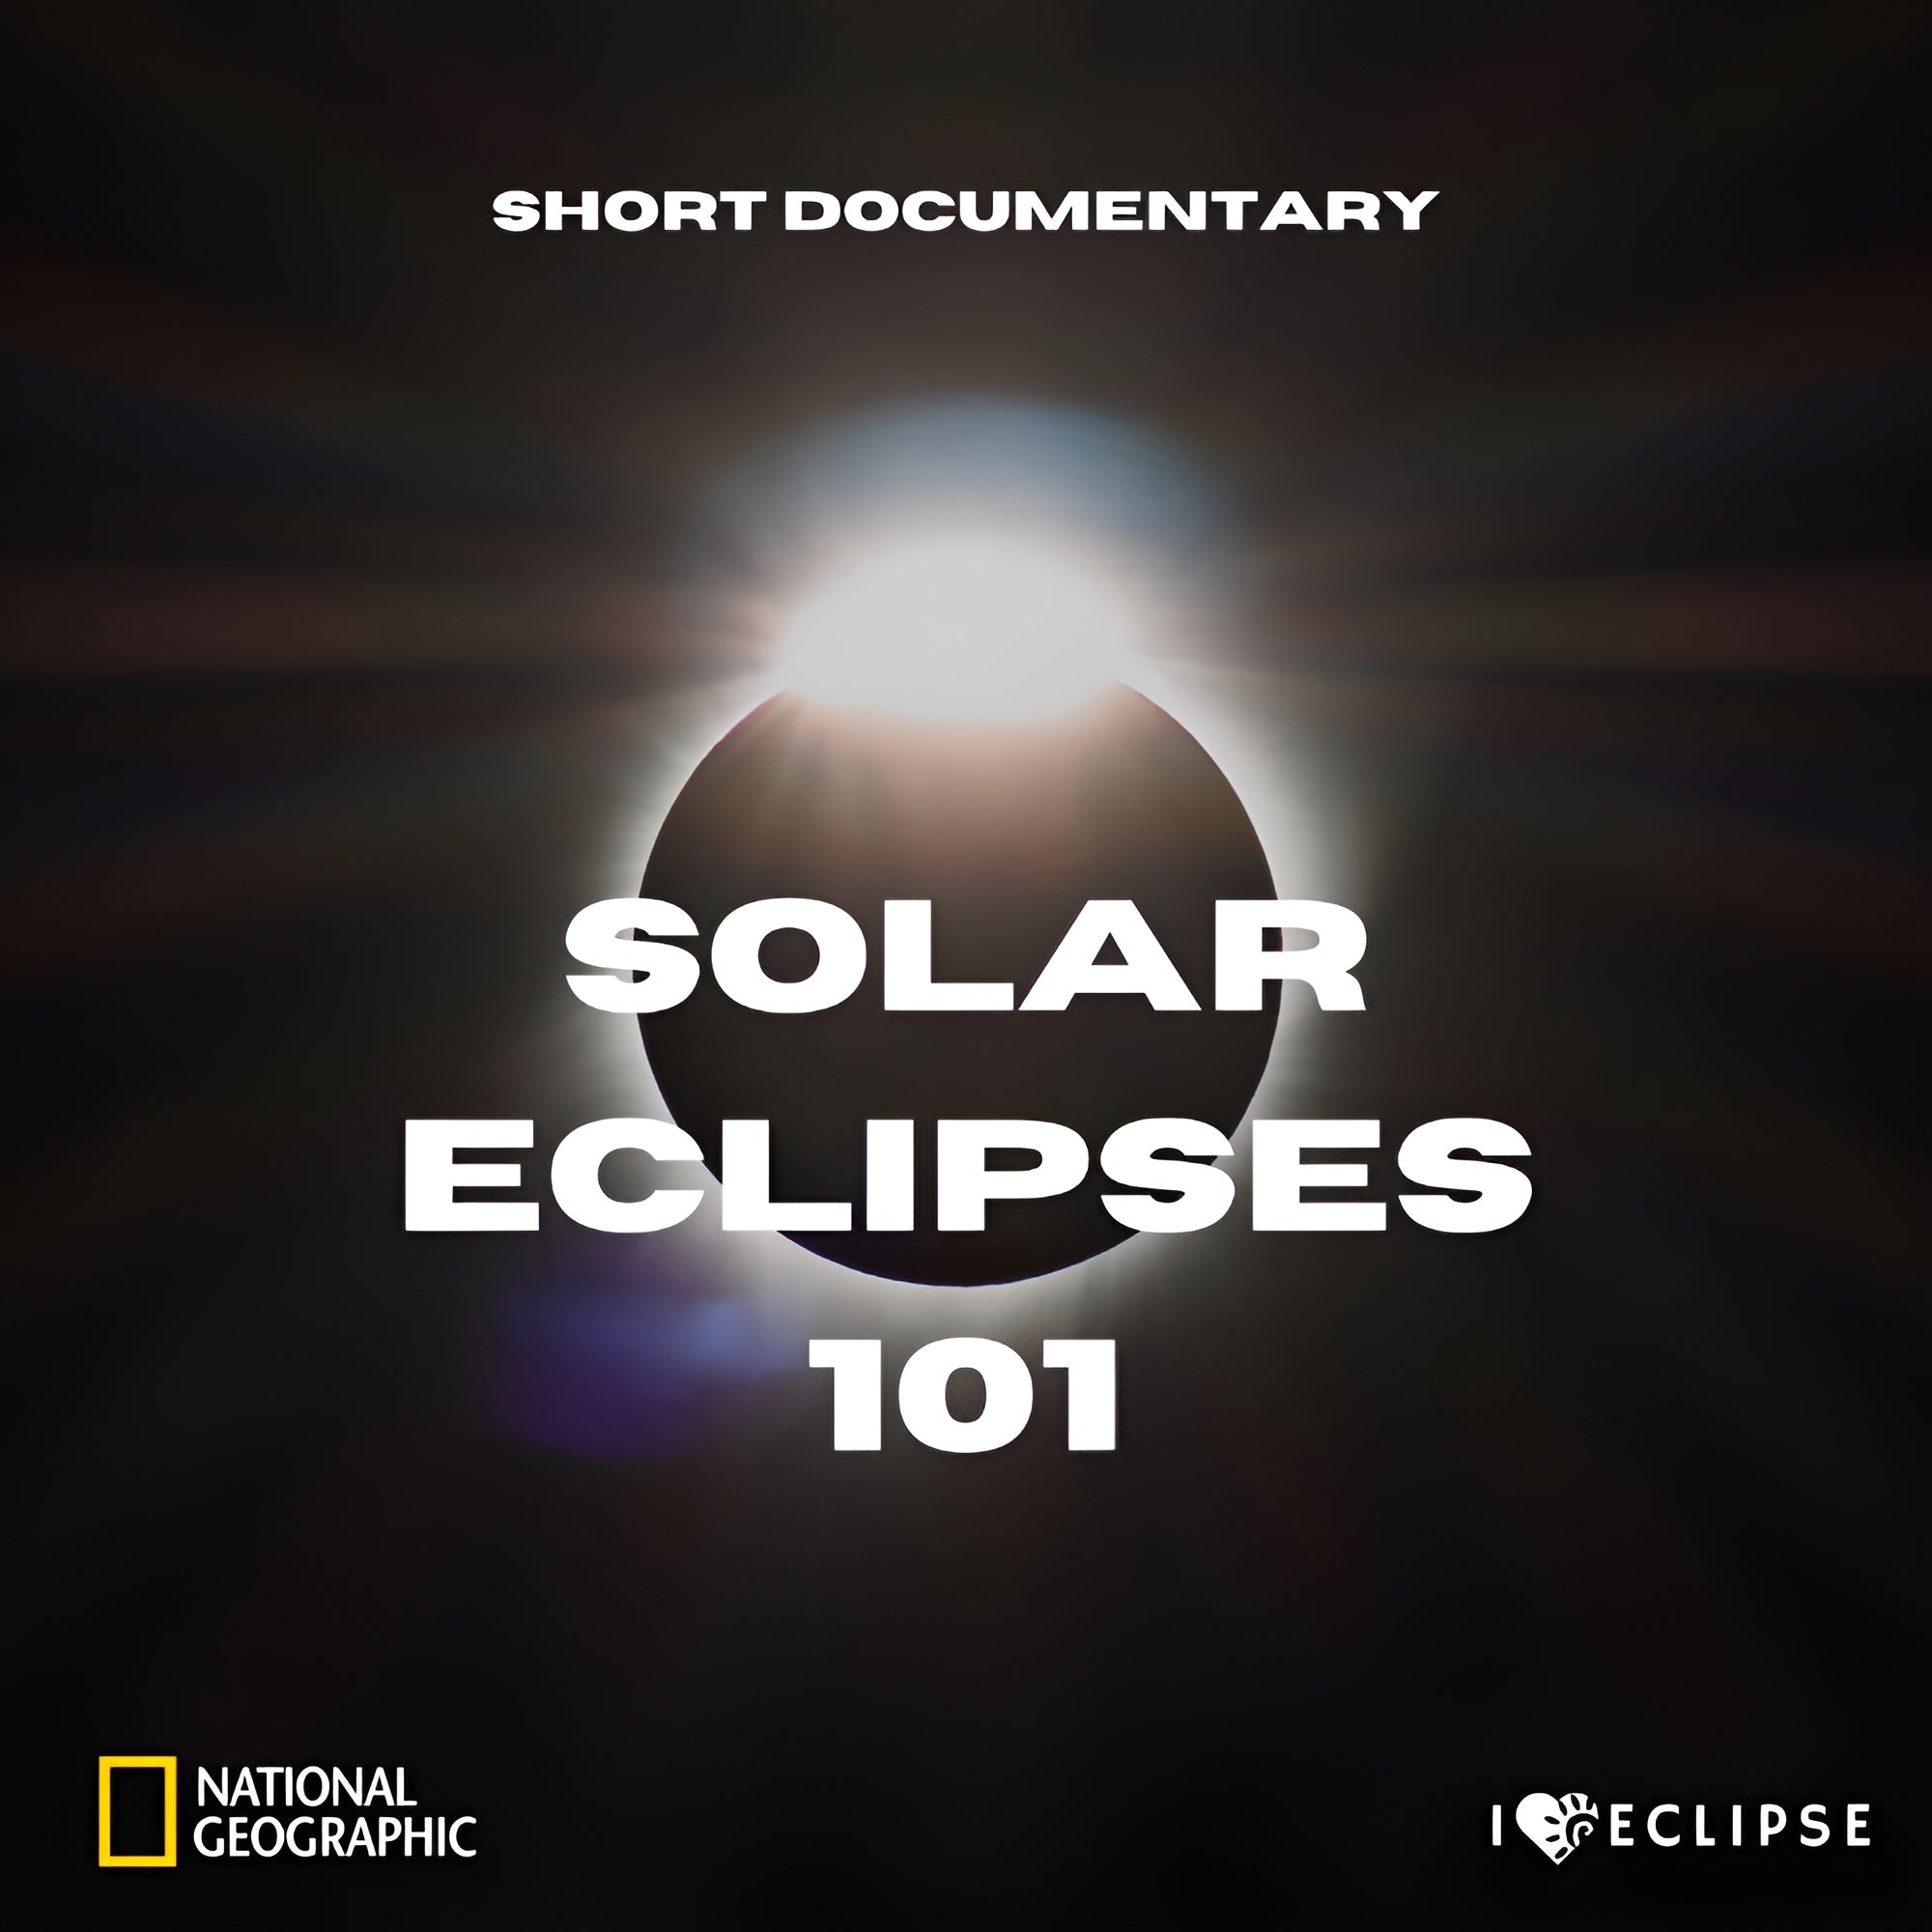 Load video: National Geographic video about Solar Eclipses